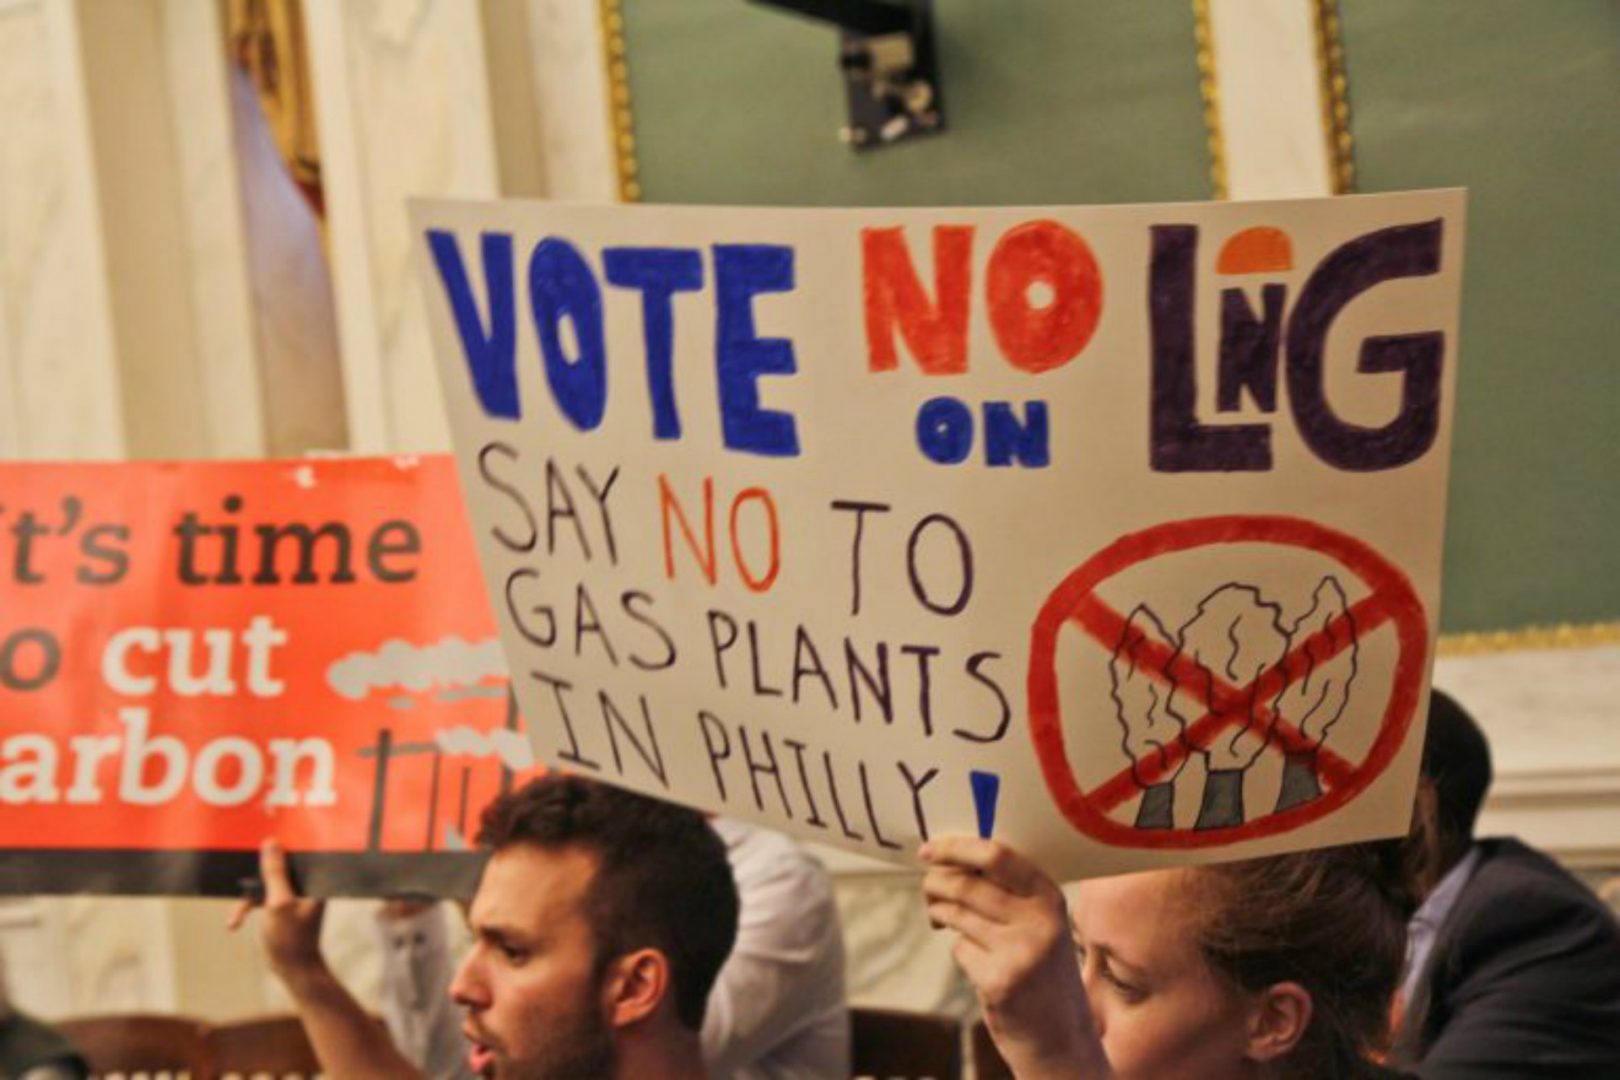 Opposition to the proposed liquefied natural gas plant in Philadelphia protest in city council chambers Thursday. 